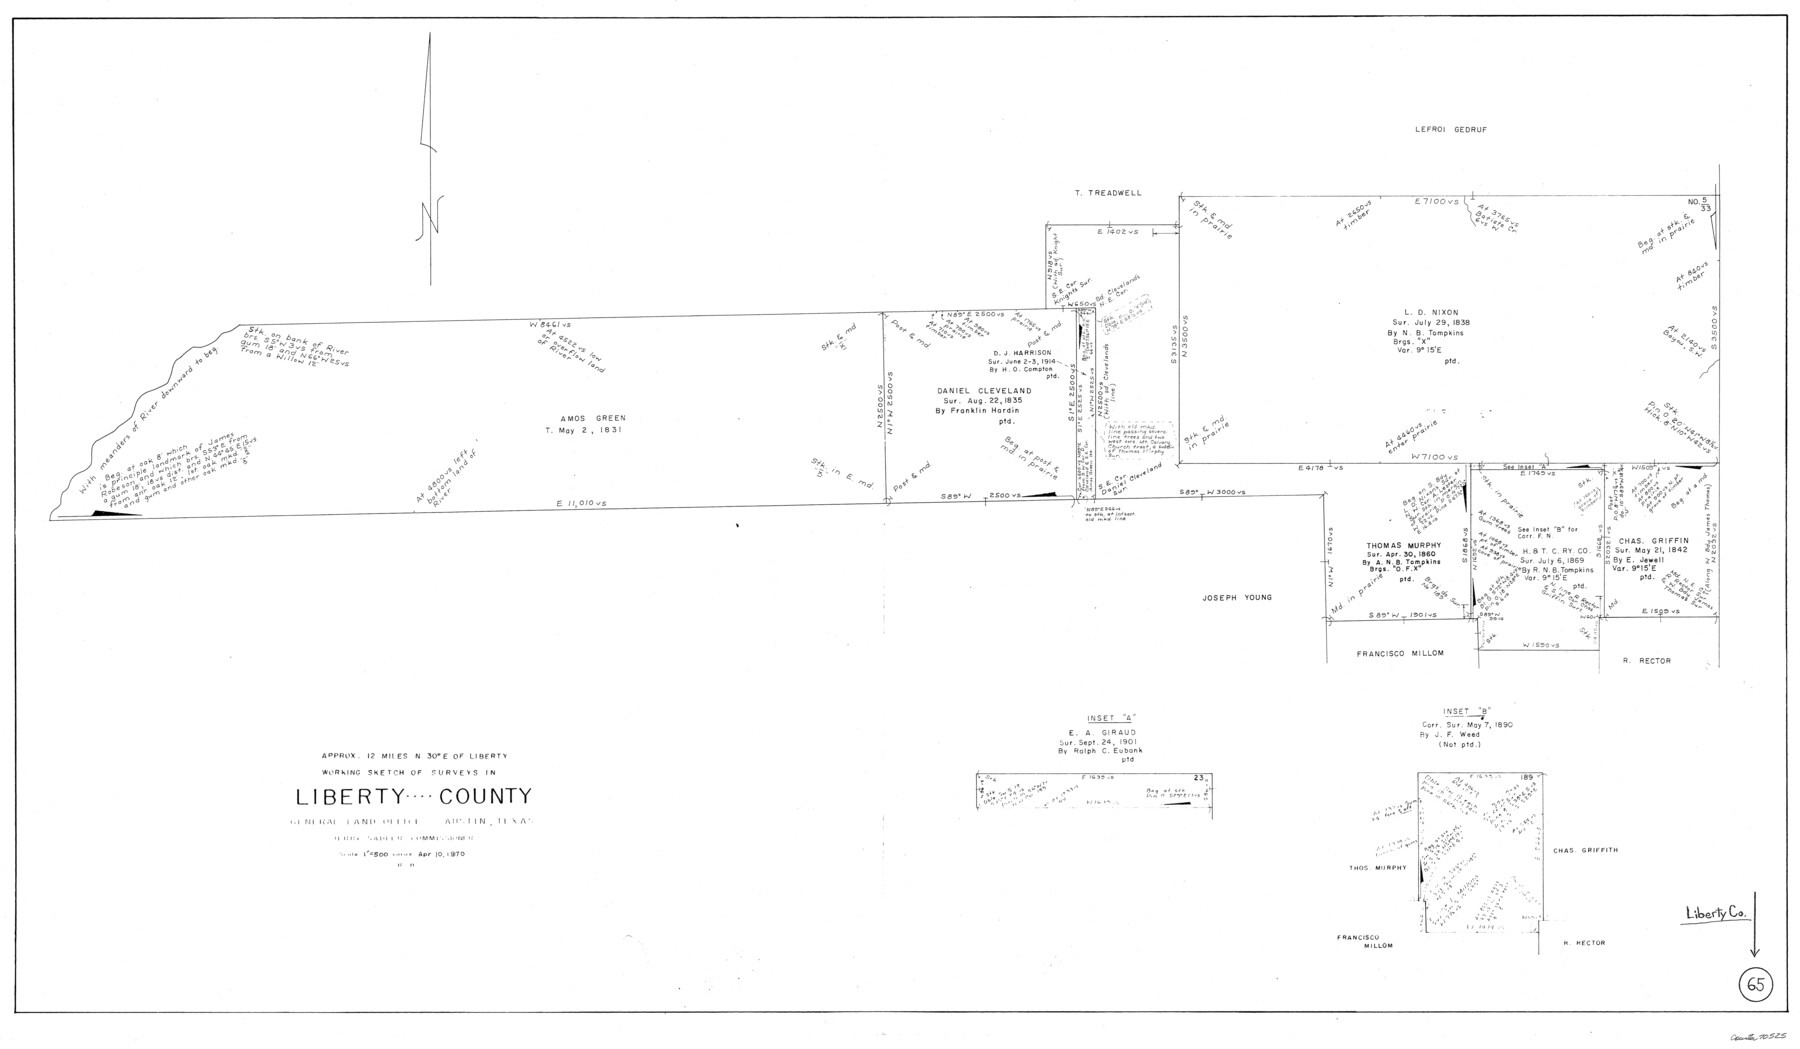 70525, Liberty County Working Sketch 65, General Map Collection